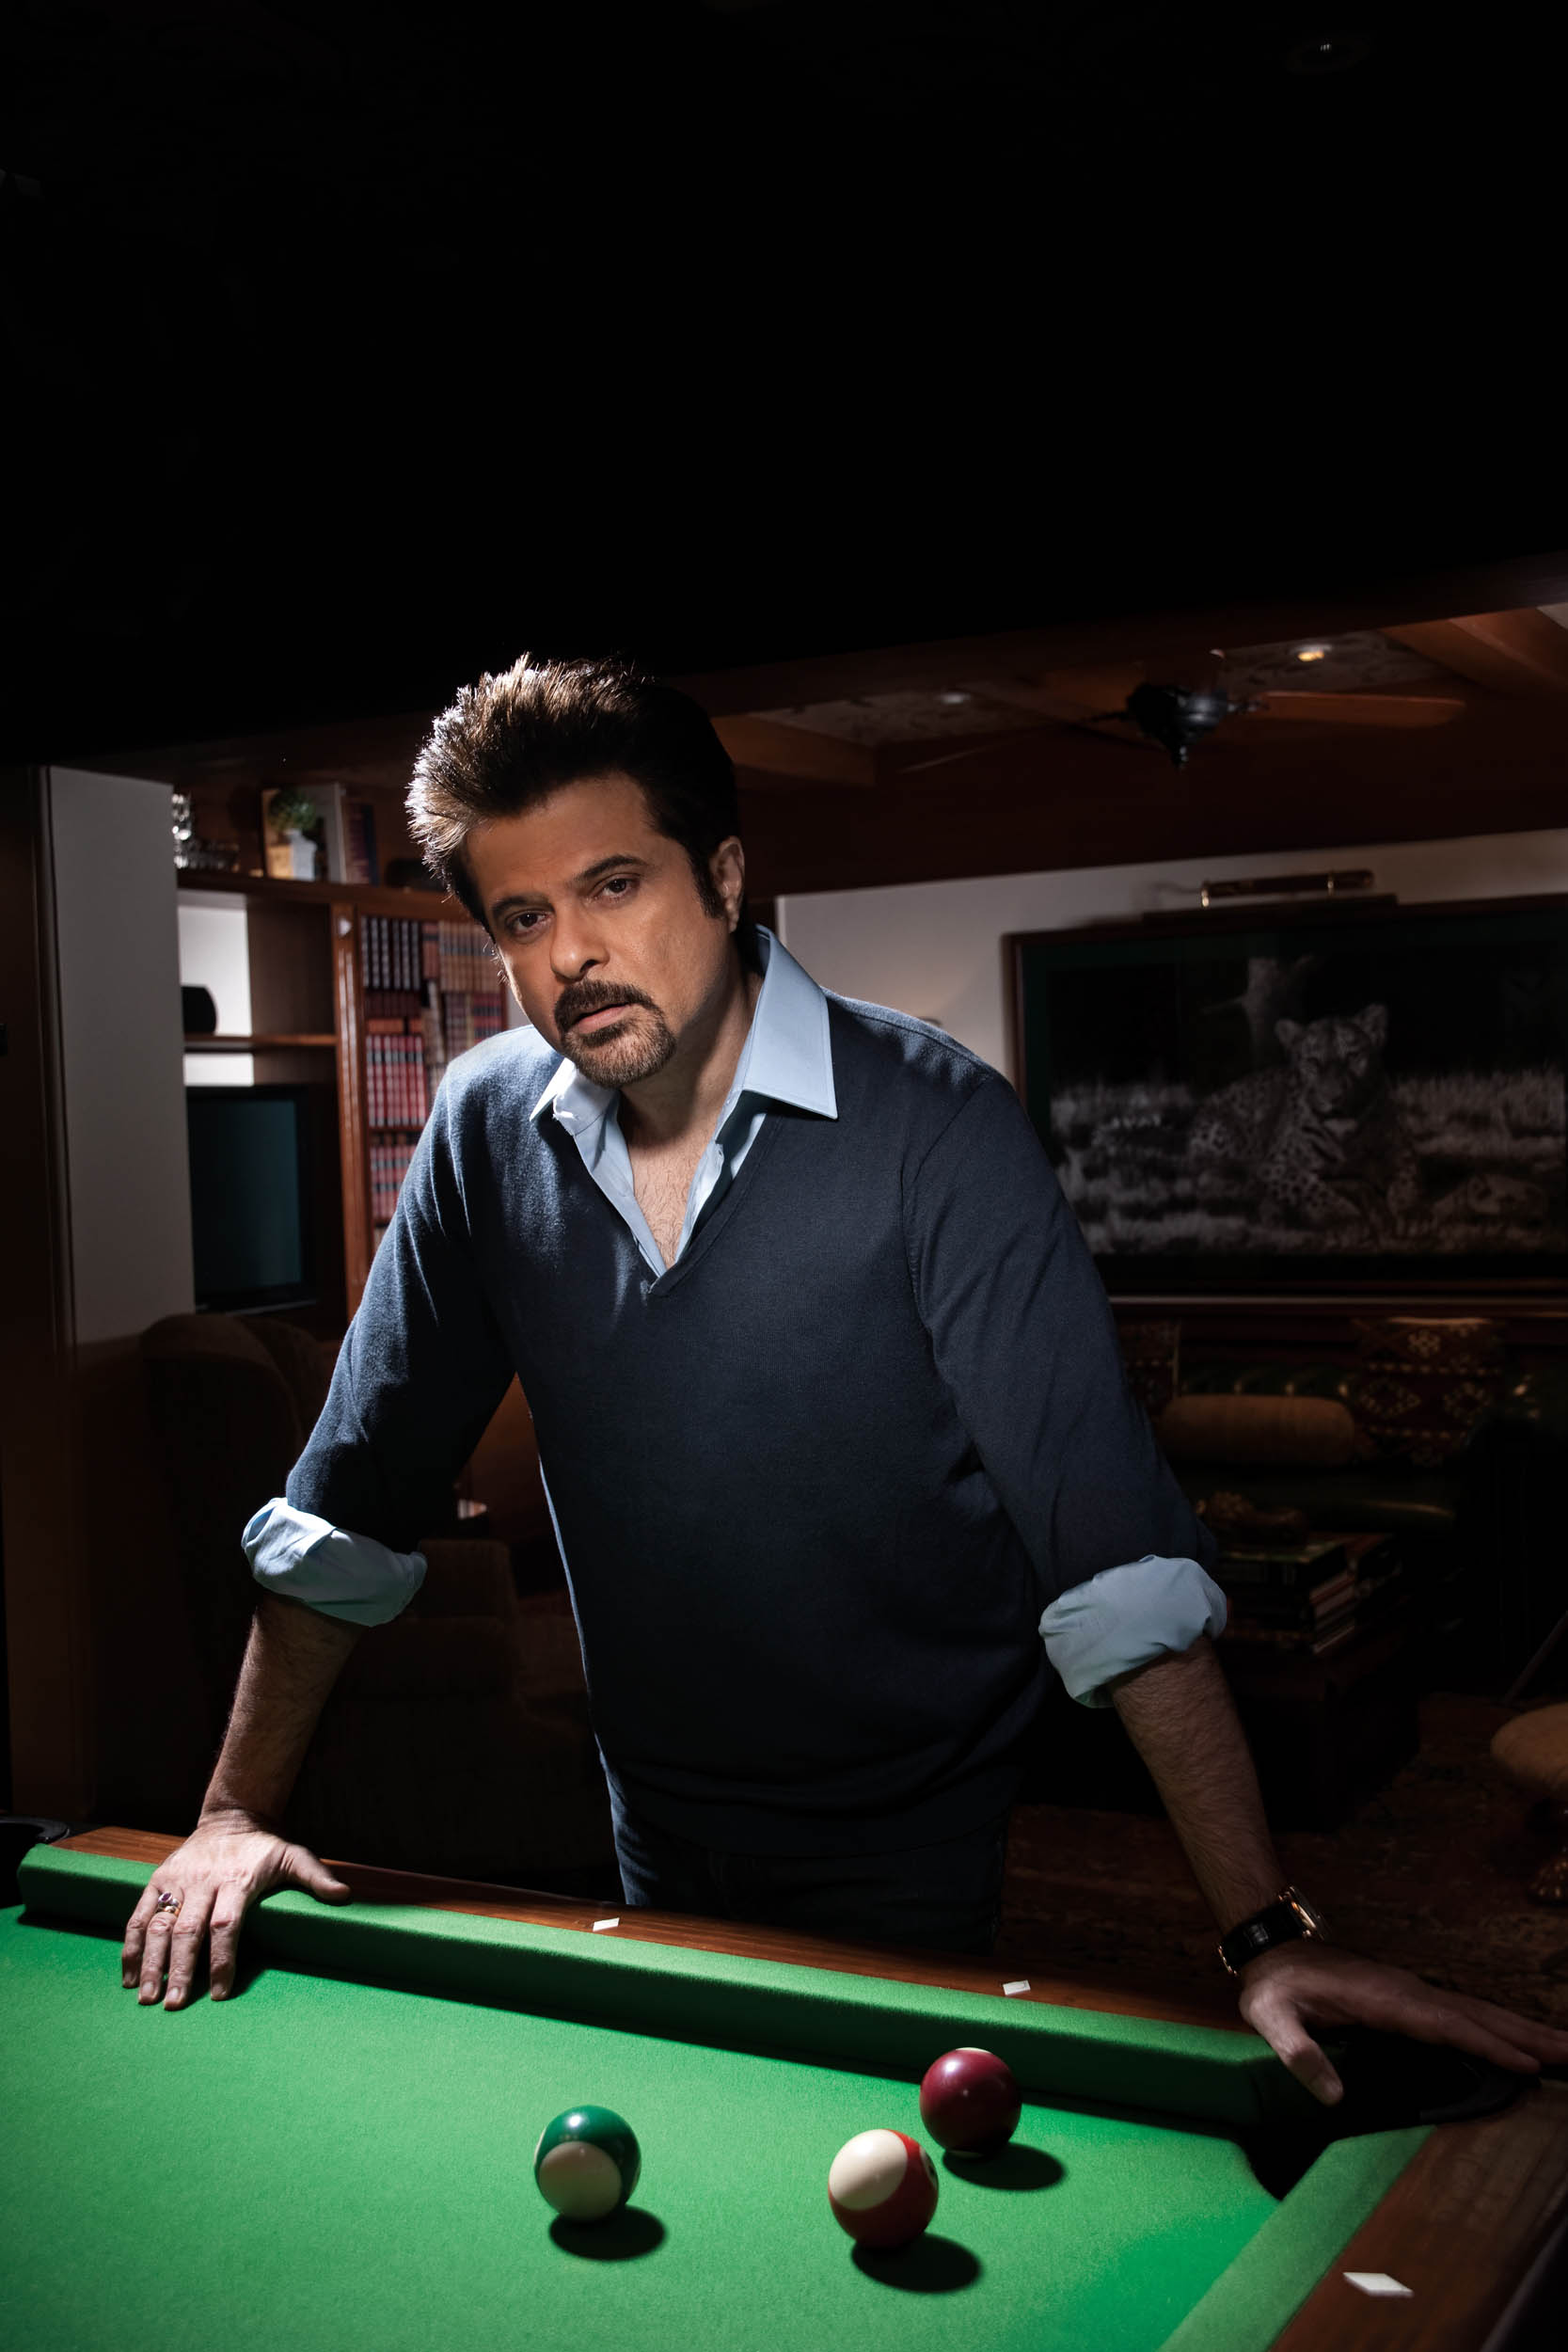 Best Bollywood Photographer in India Vikram Bawa, Actor Anil Kapoor for Hello! Magazine, Editorial, Actorslife, Bollywood, Shooting with Star, Style, Published Photographer, Celebrity Photoshoot, Best Editorial Photographer by Vikram Bawa, Best Fashion Photographer by Vikram Bawa, Mumbai, India